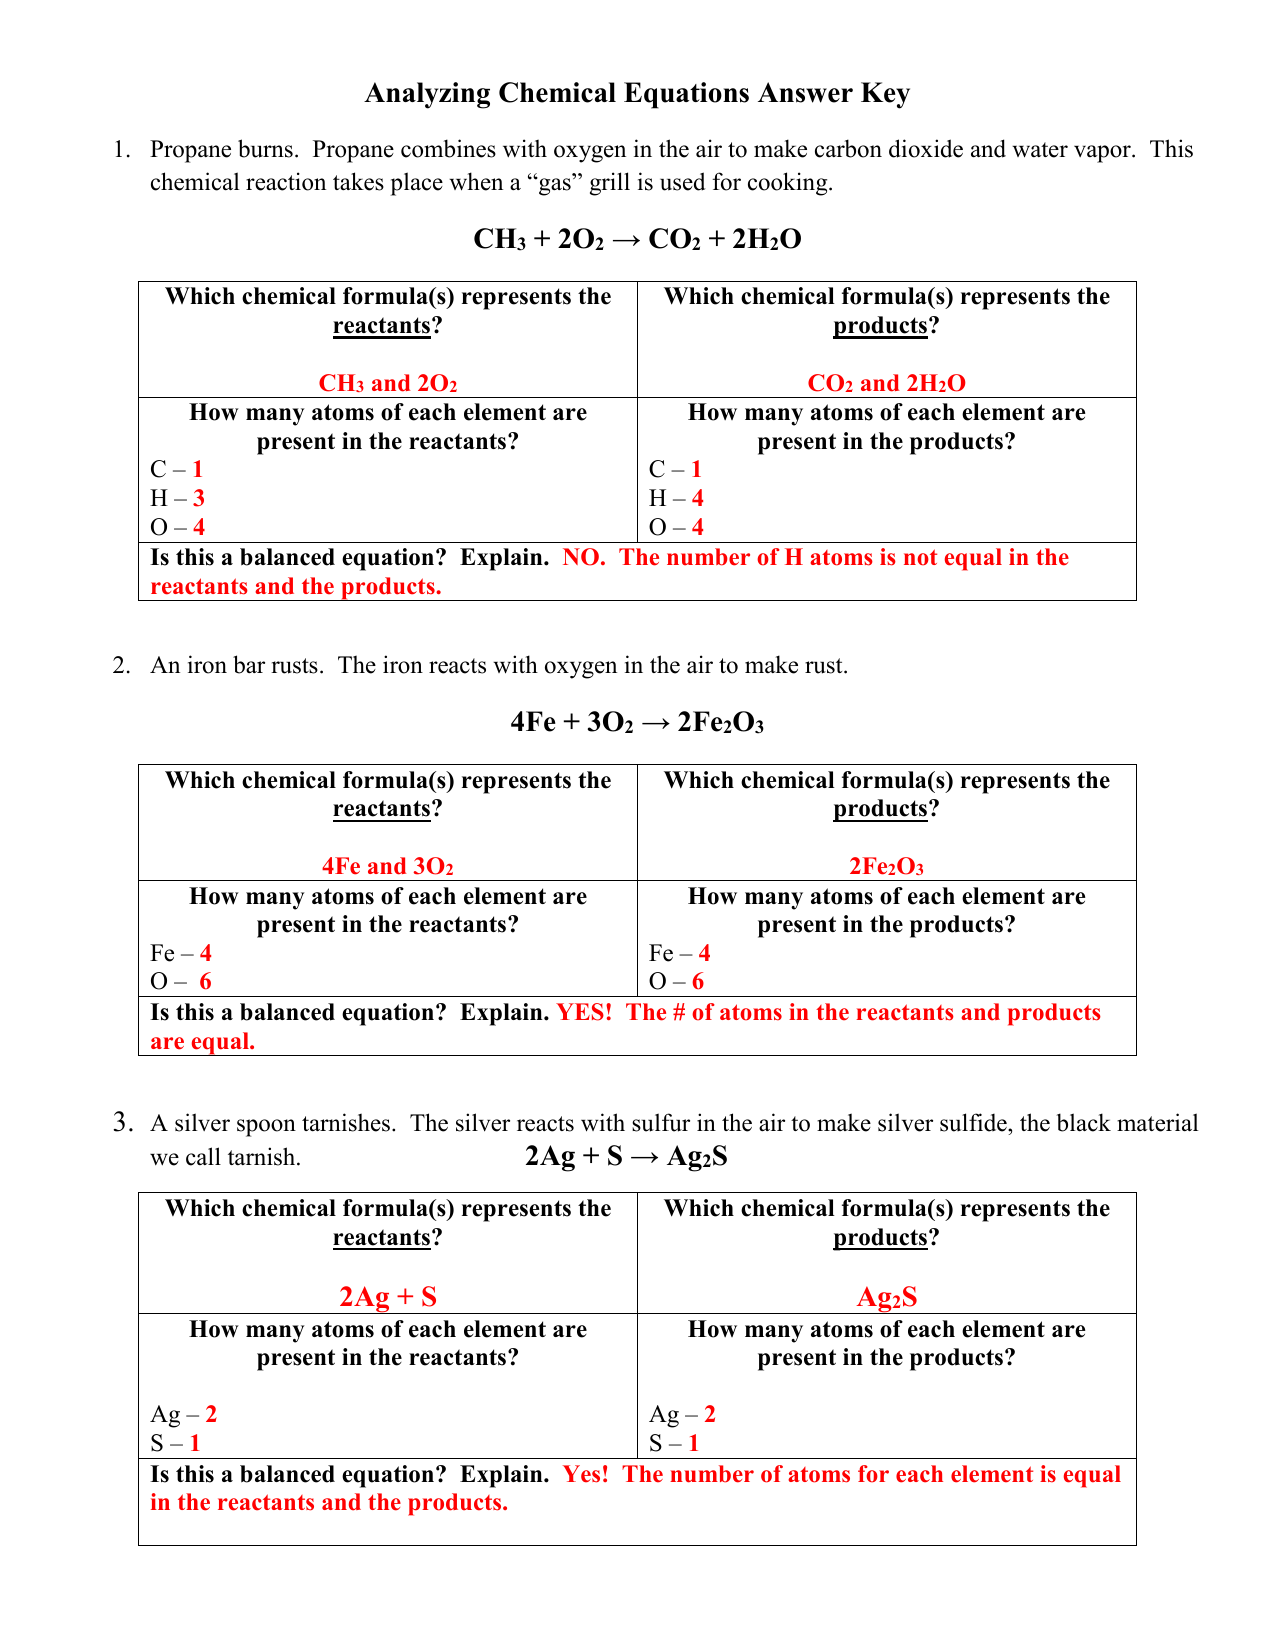 Analyzing Chemical Equations ANSWER KEY For Chemical Formula Worksheet Answers